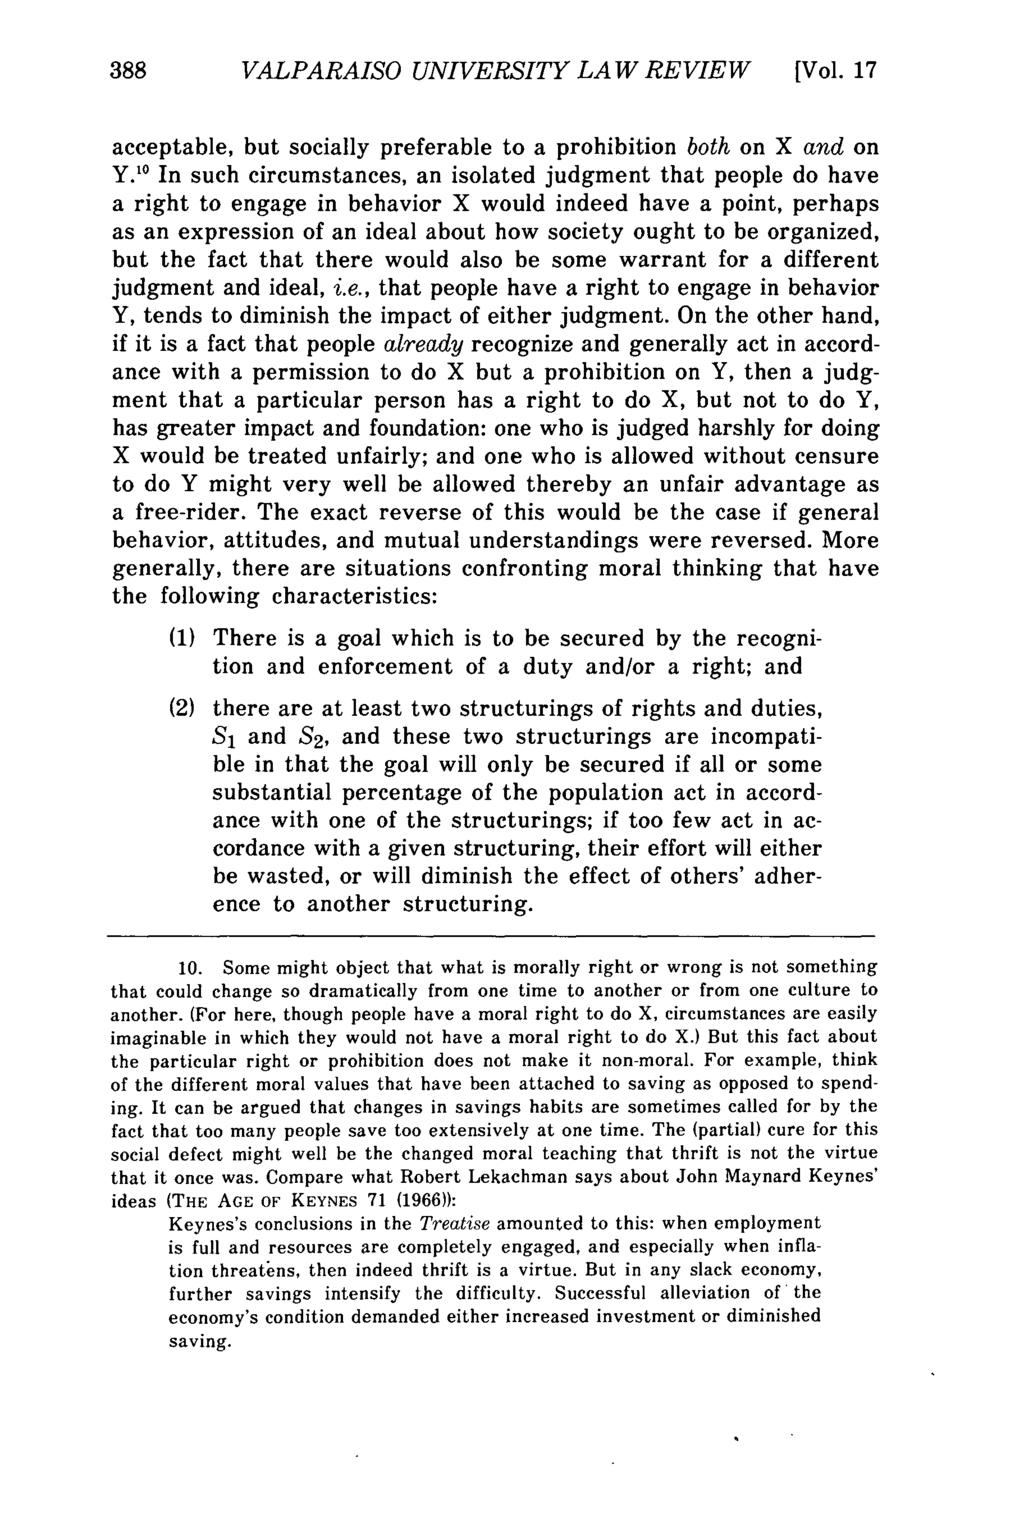 388 Valparaiso VALPARAISO University UNIVERSITY Law Review, Vol. LAW 17, No. REVIEW 3 [1983], Art. 2 [Vol. 17 acceptable, but socially preferable to a prohibition both on X and on Y.